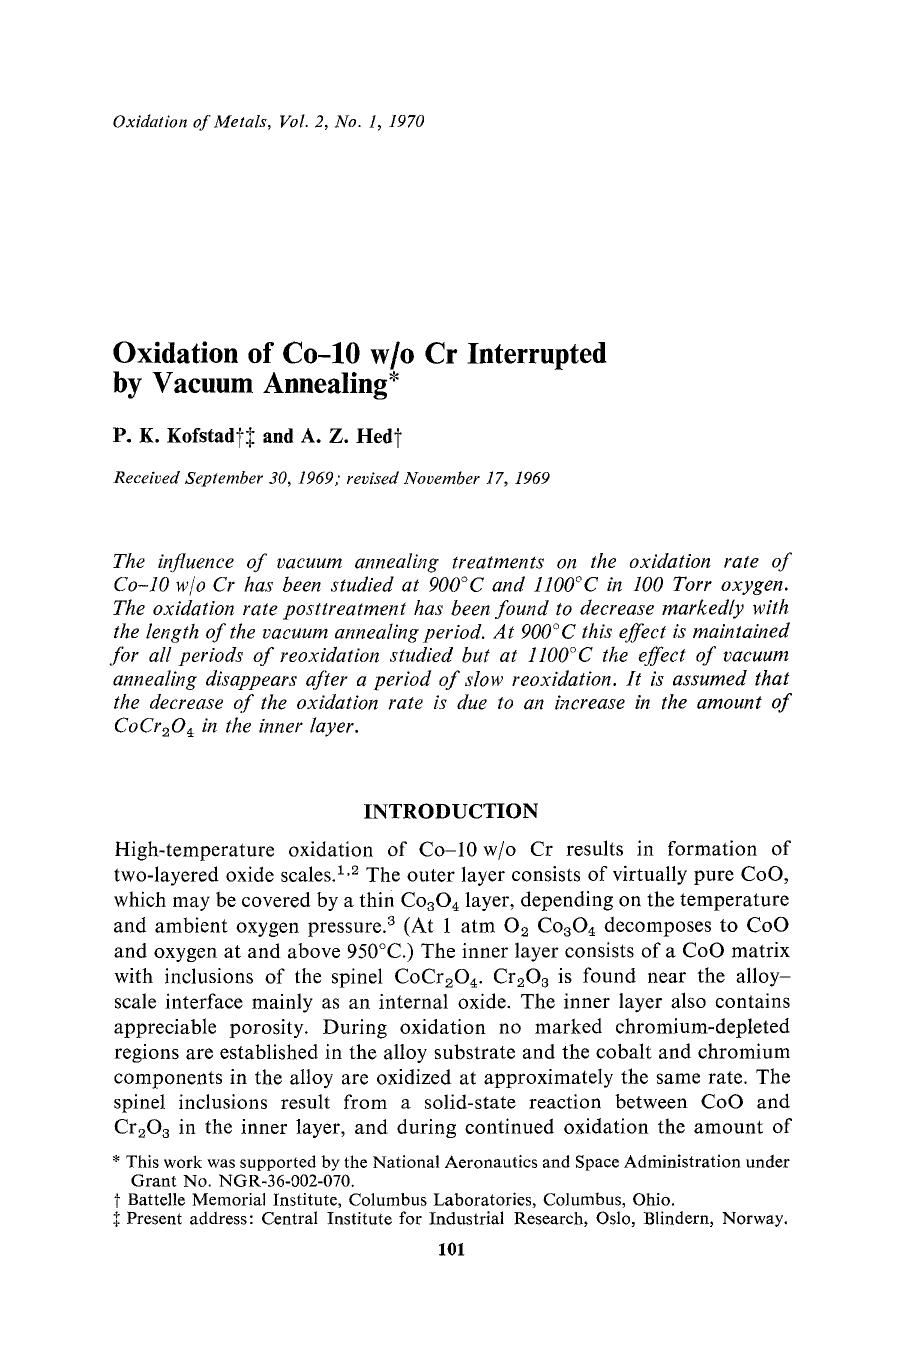 Oxidation of Co-10 wo Cr interrupted by vacuum annealing by Unknown